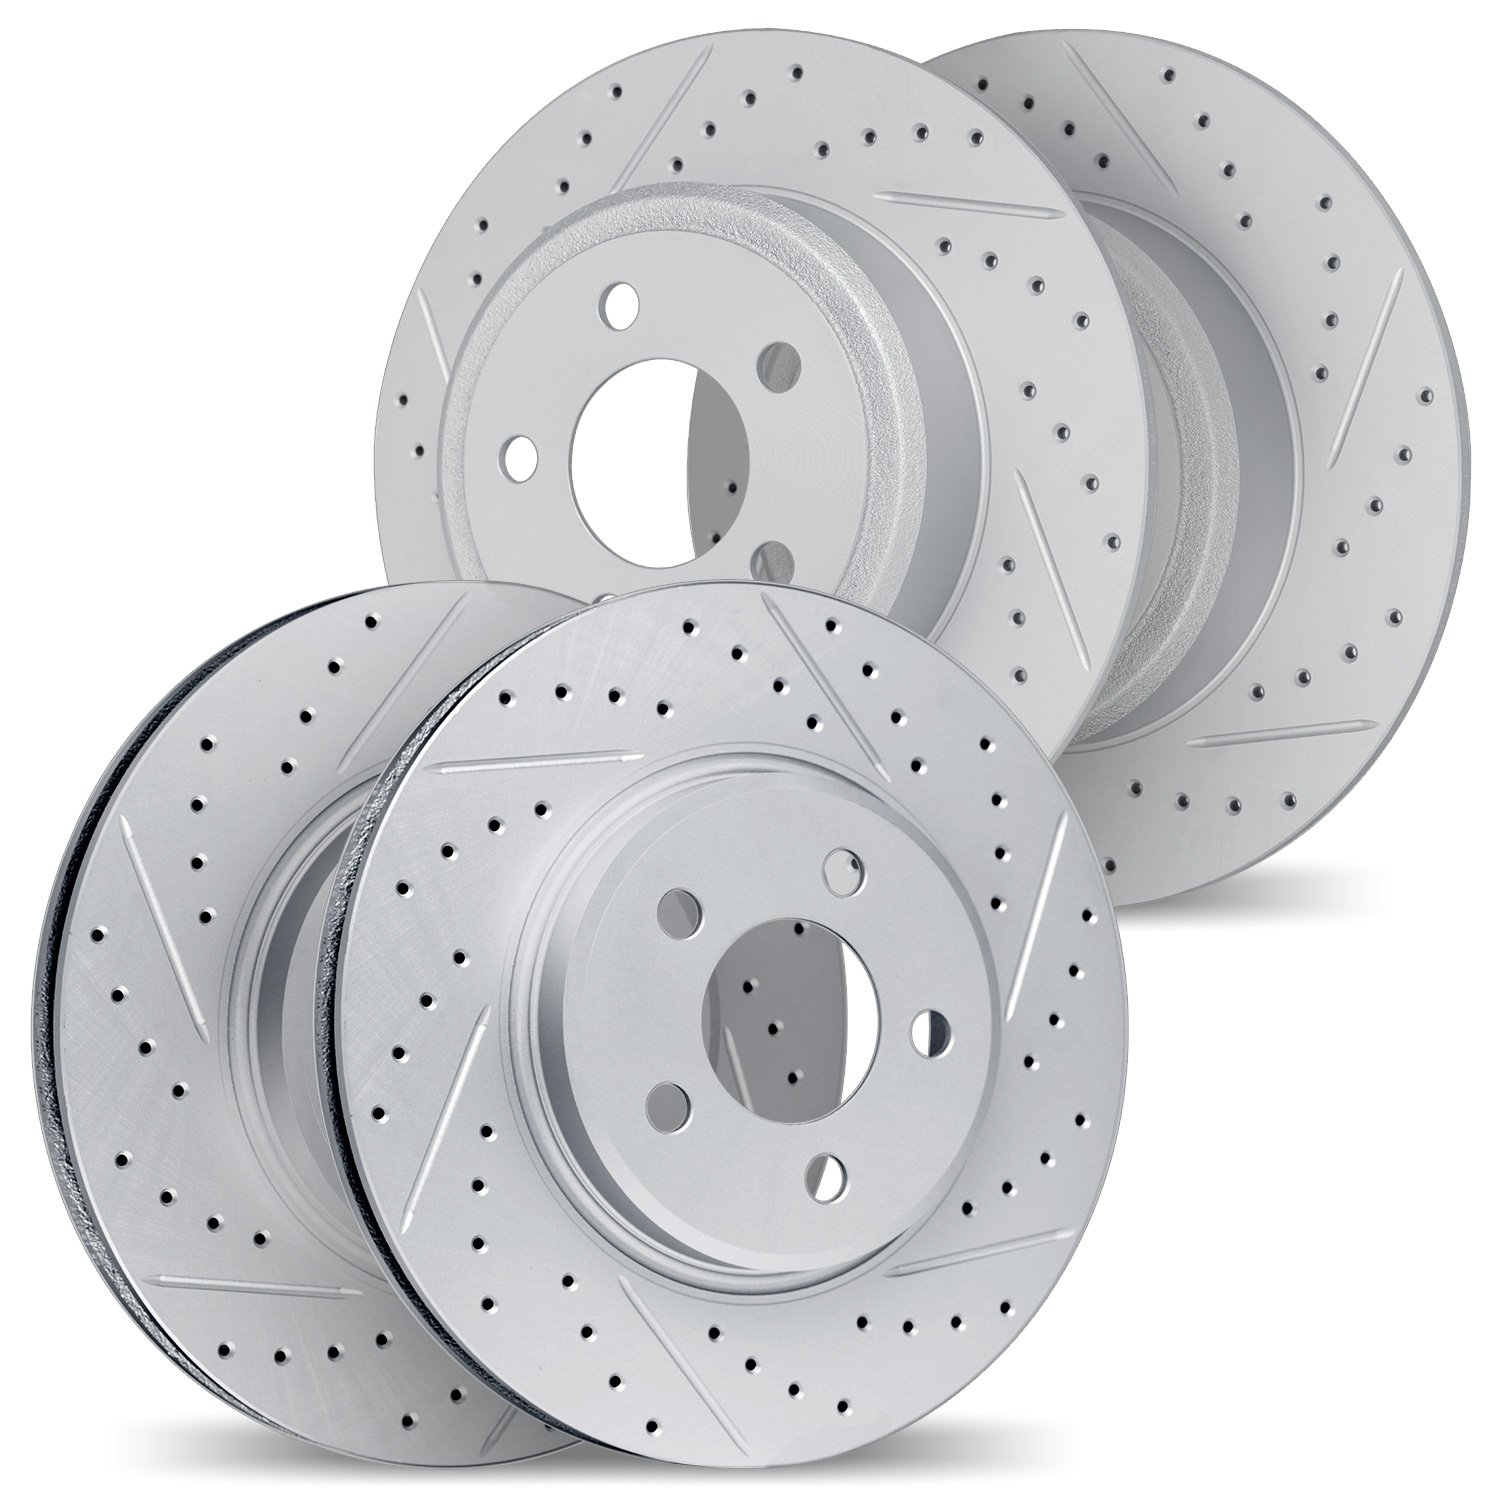 2004-74017 Geoperformance Drilled/Slotted Brake Rotors, 1998-2015 Audi/Volkswagen, Position: Front and Rear